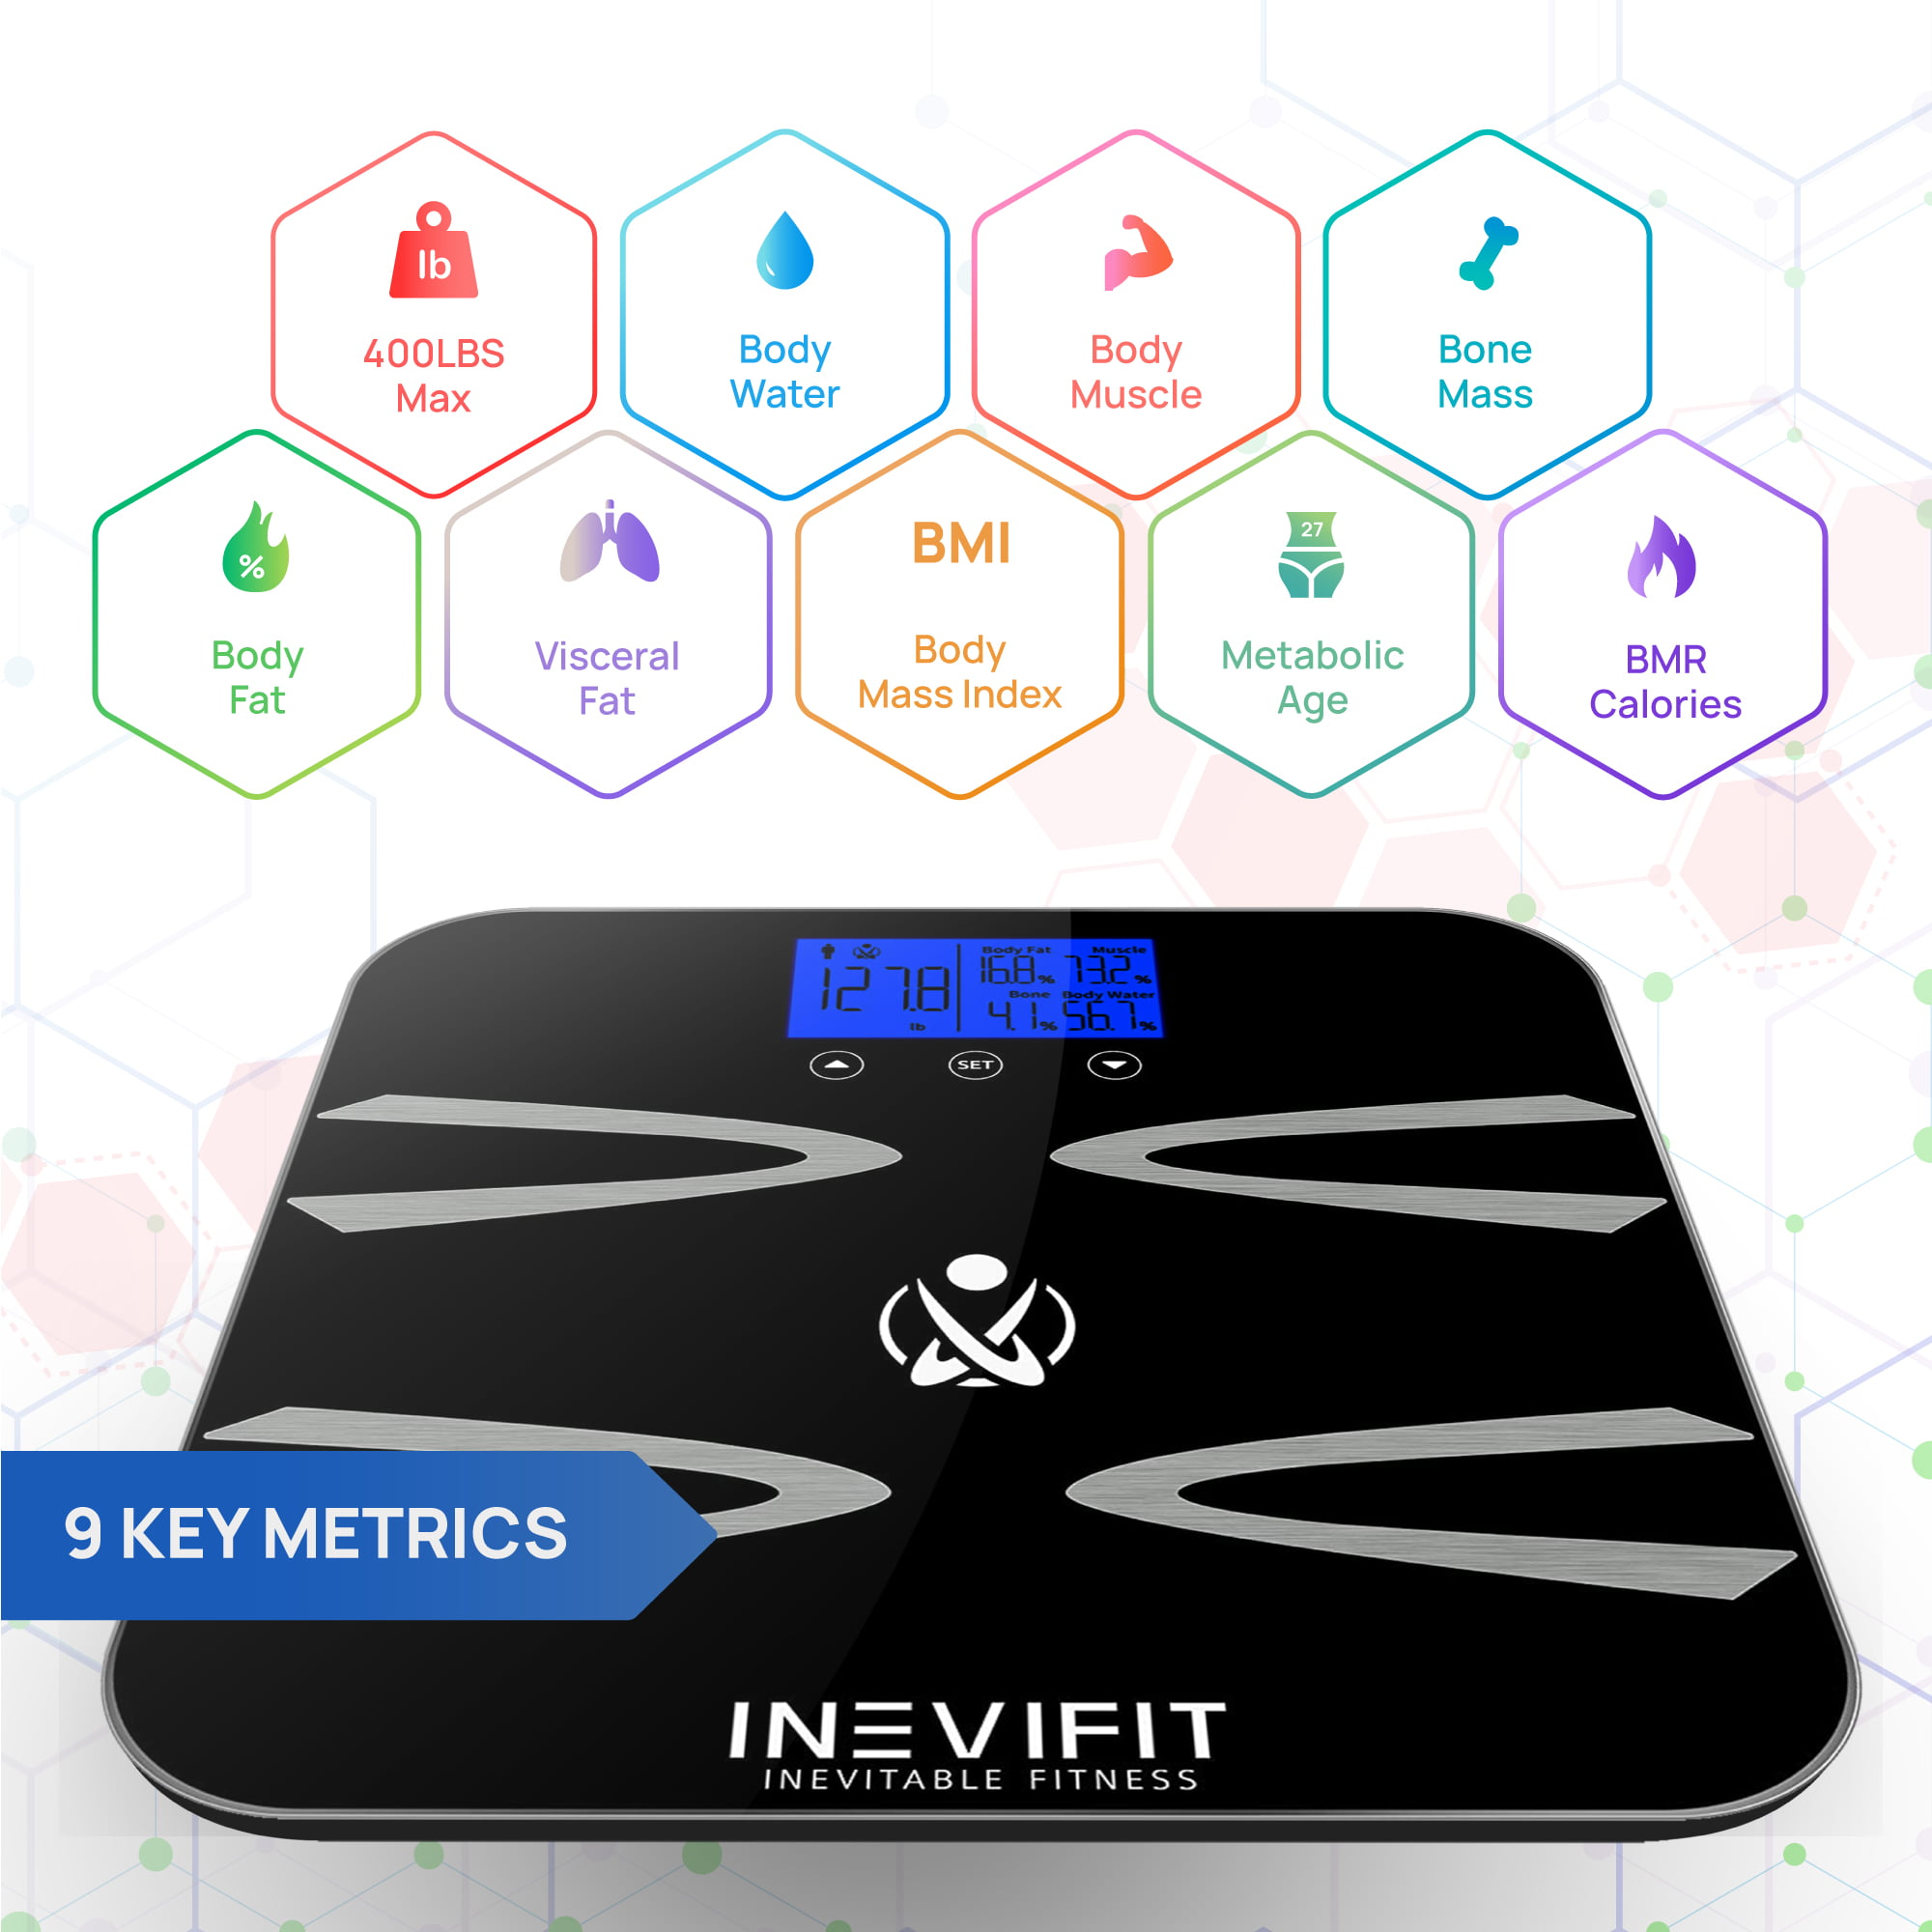 INEVIFIT BATHROOM SCALE, Highly Accurate • Price »